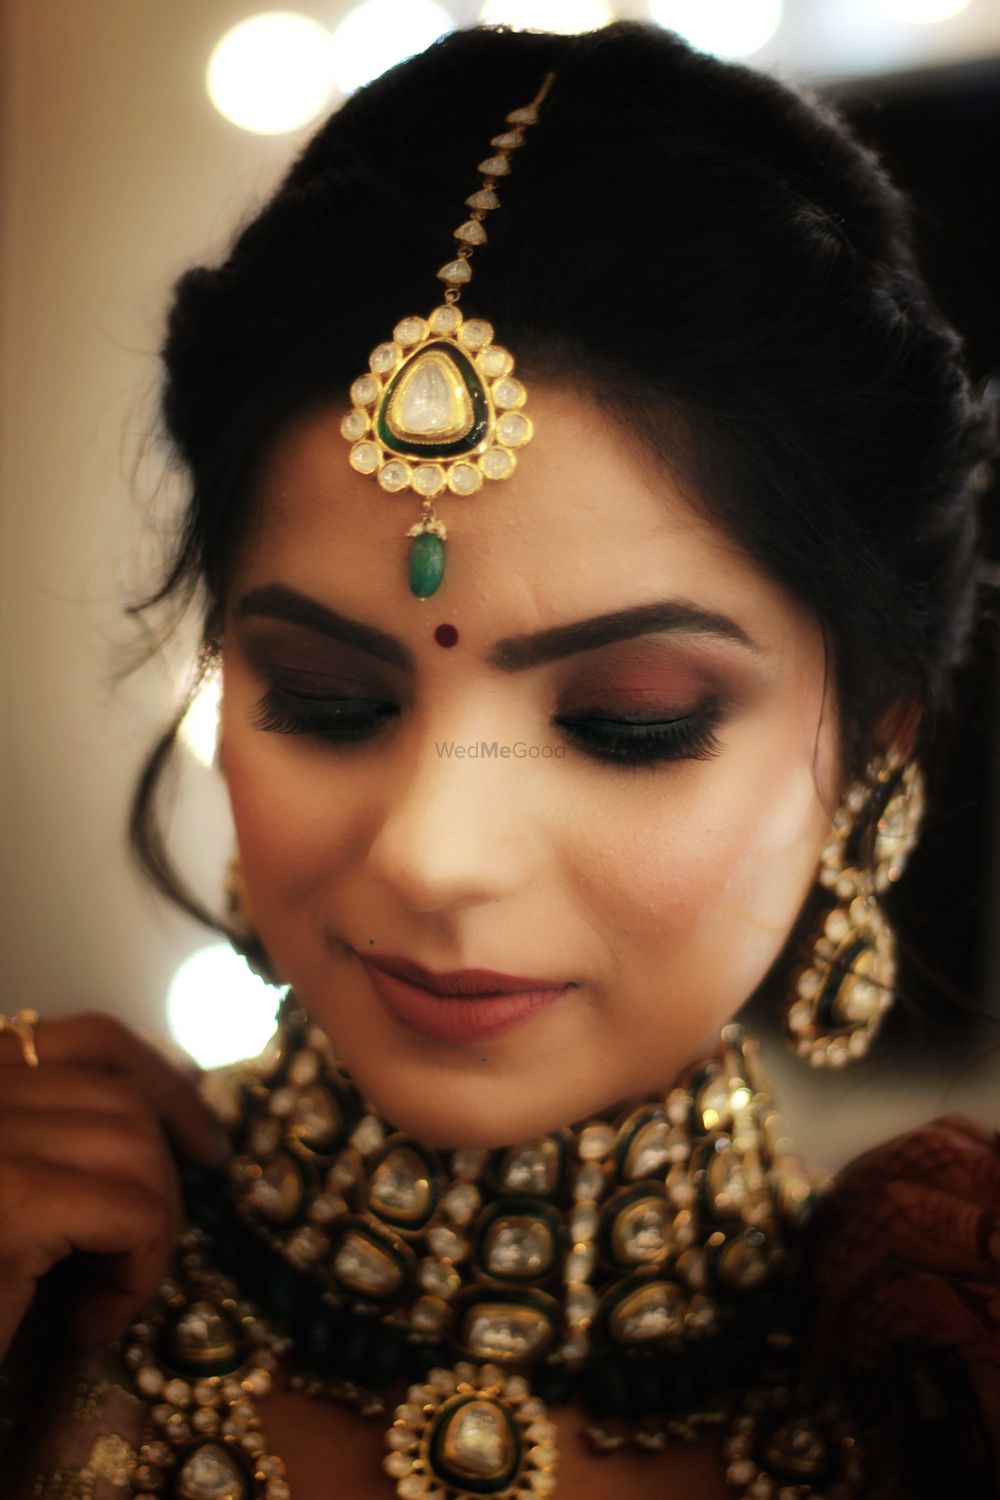 Photo From Bride Tanu - By Anjali Khandelwal Official